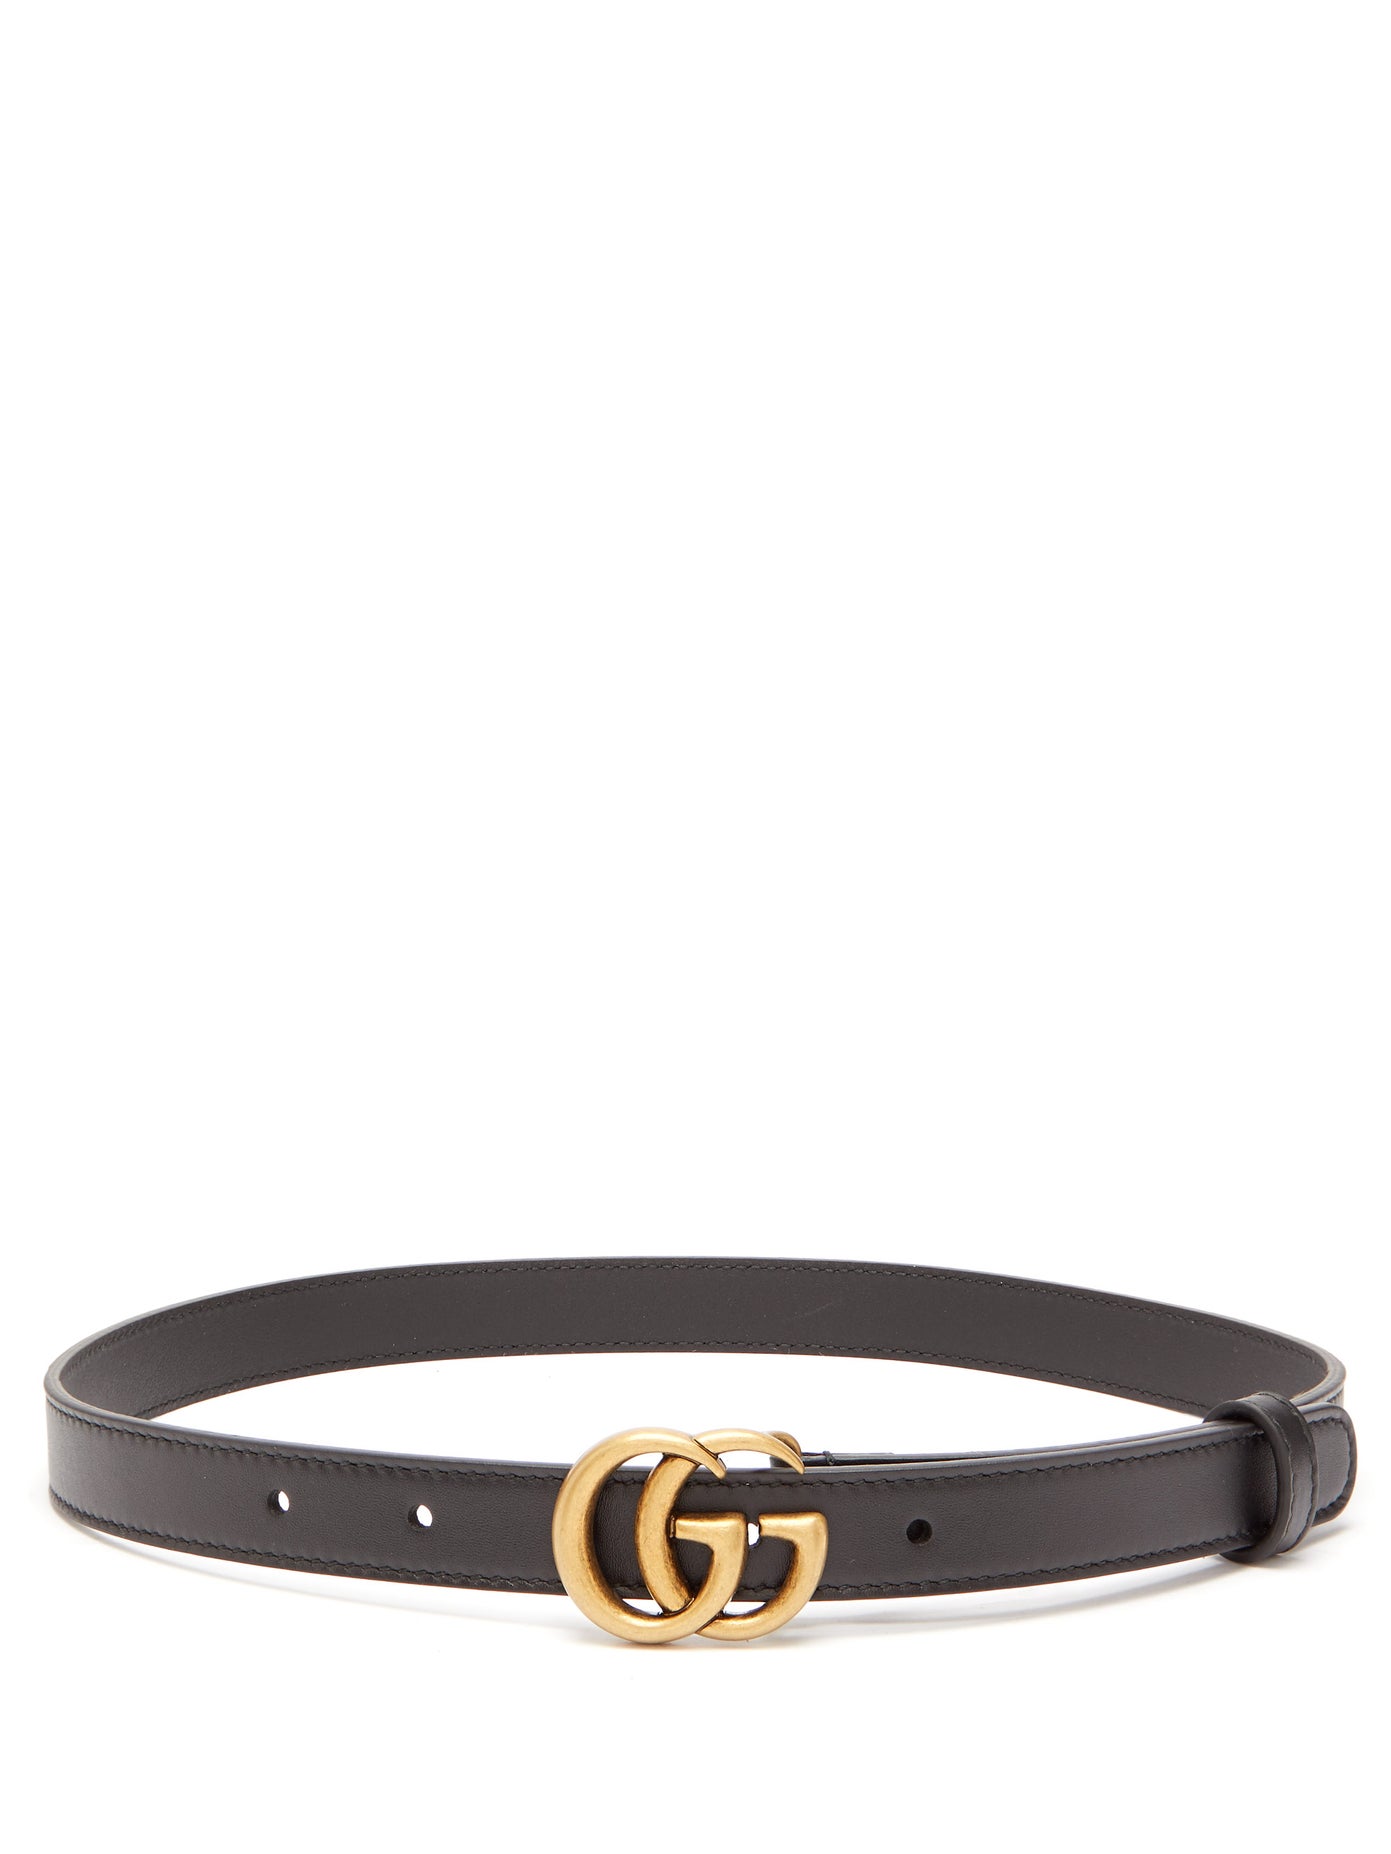 Gucci - Gg Leather Belt | ABOUT ICONS